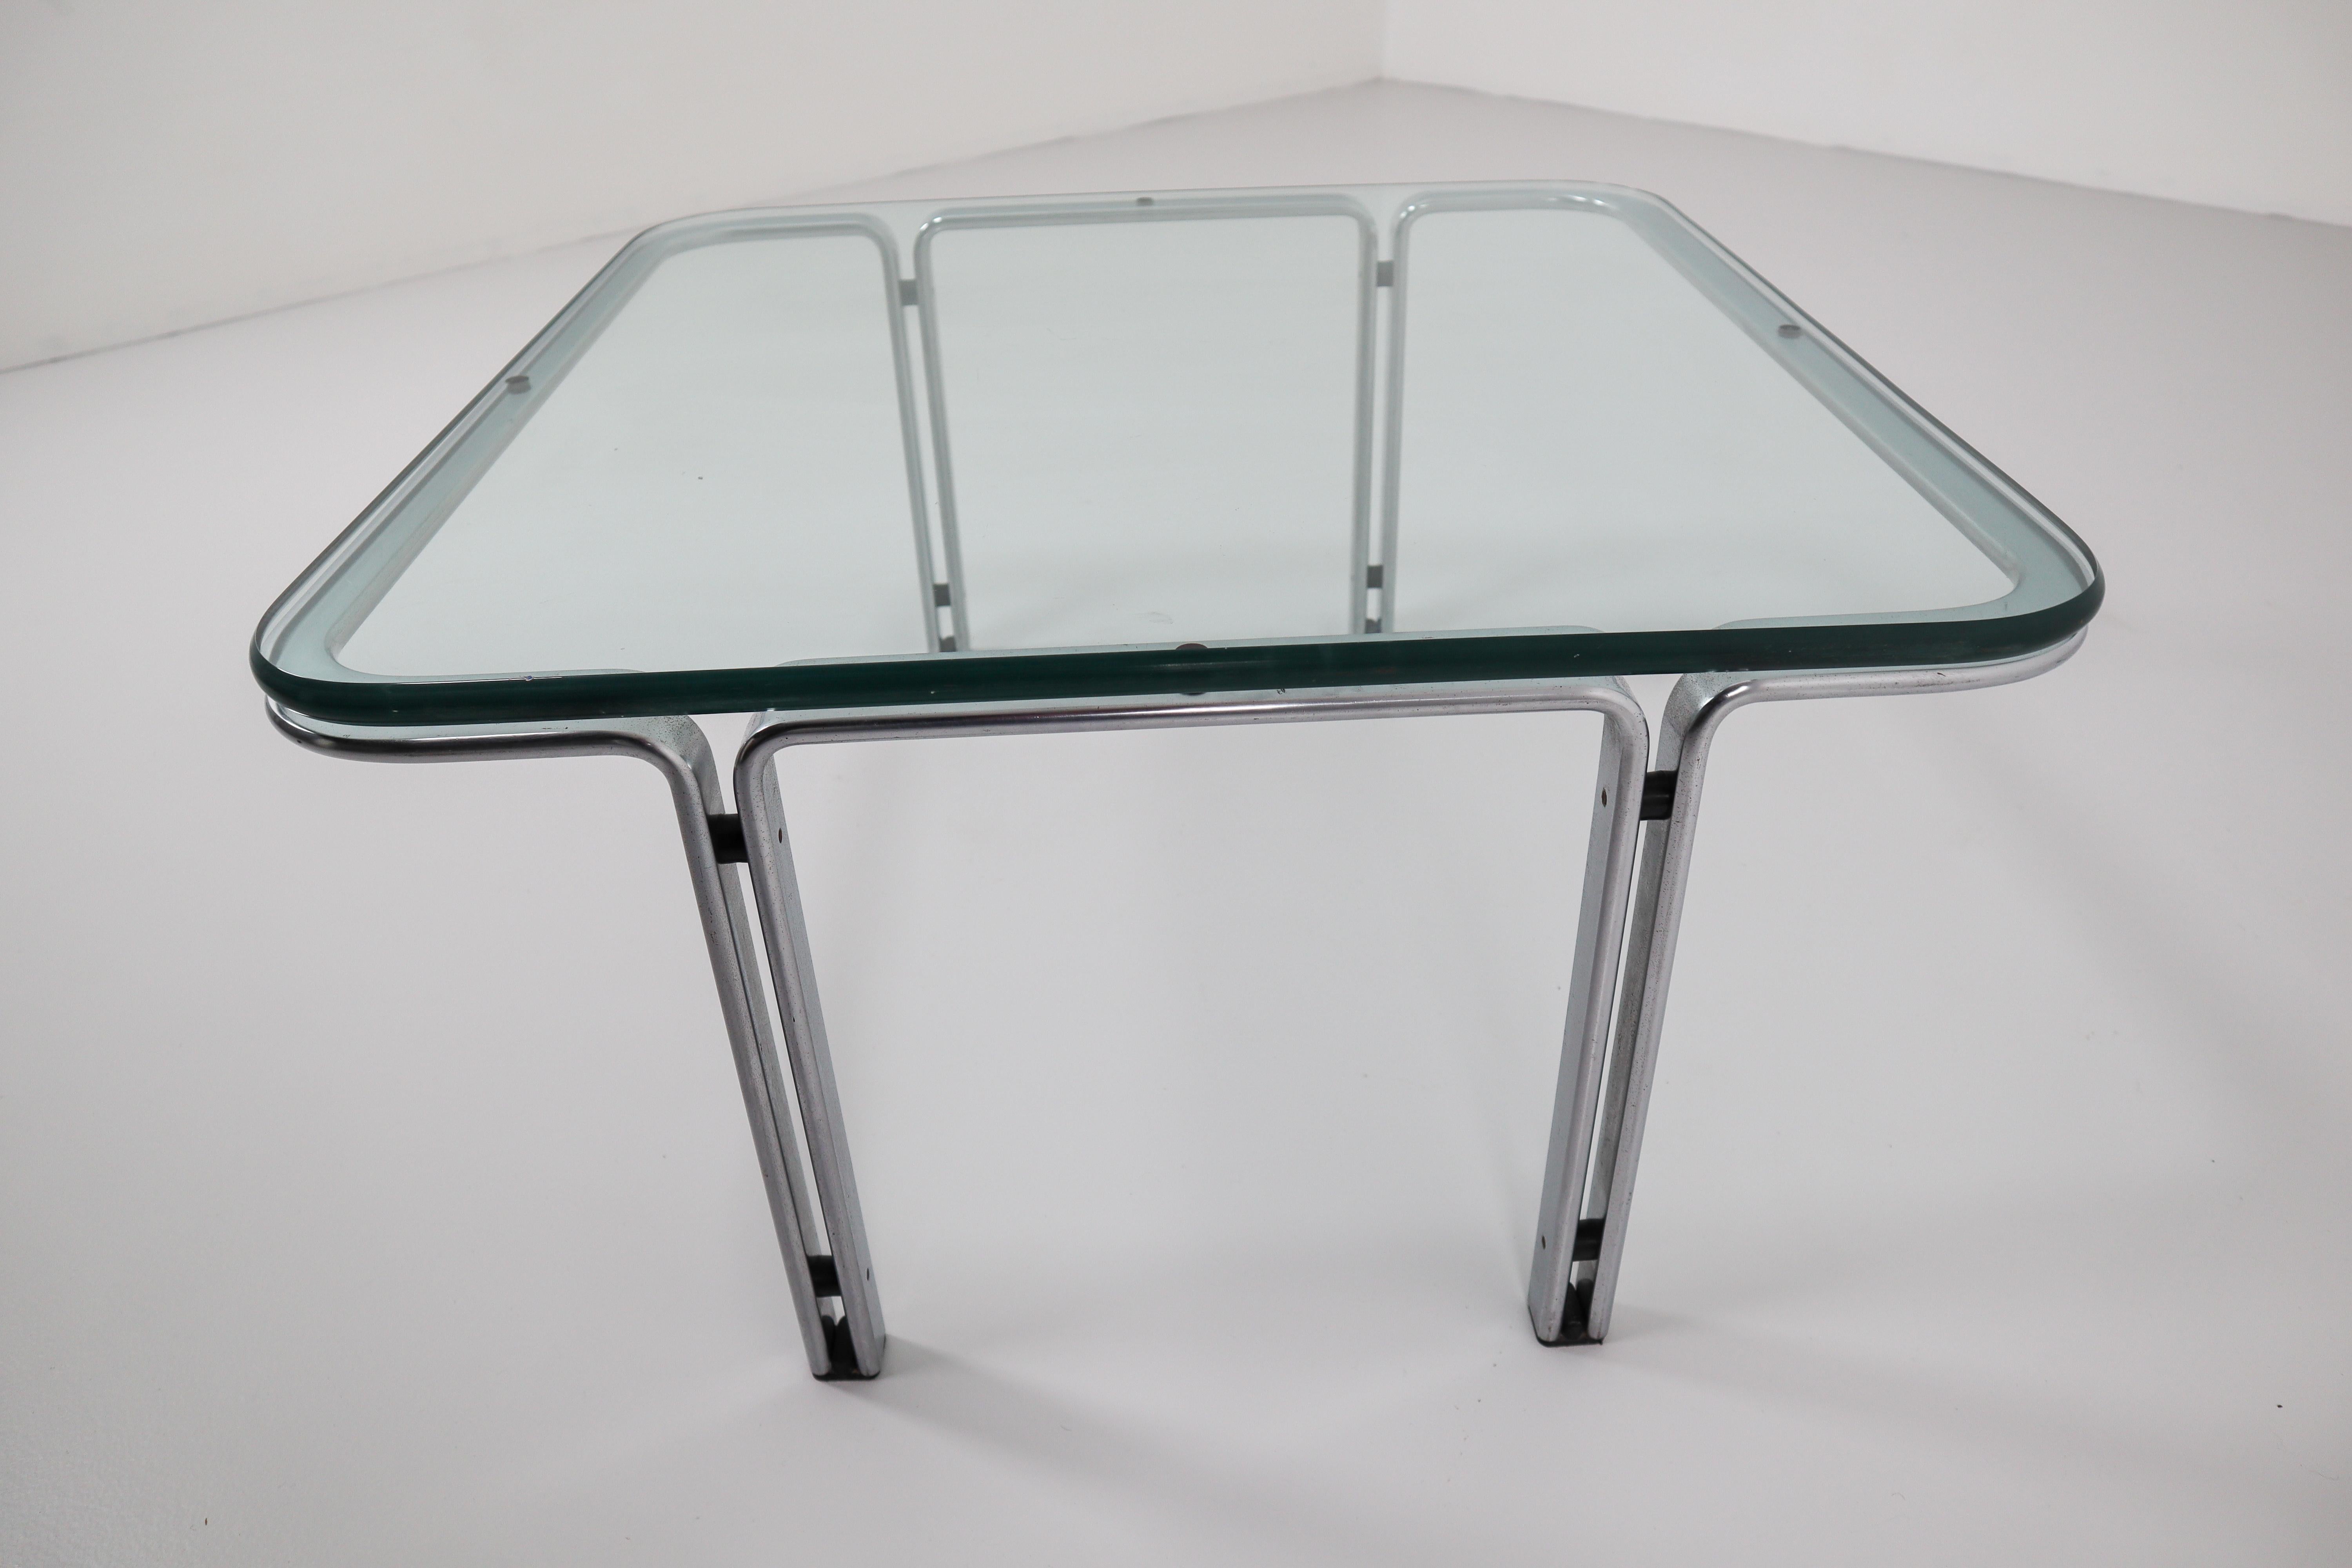 20th Century Midcentury Table in Cristal-Plate Glass and Chrome Steel by Horst Brüning